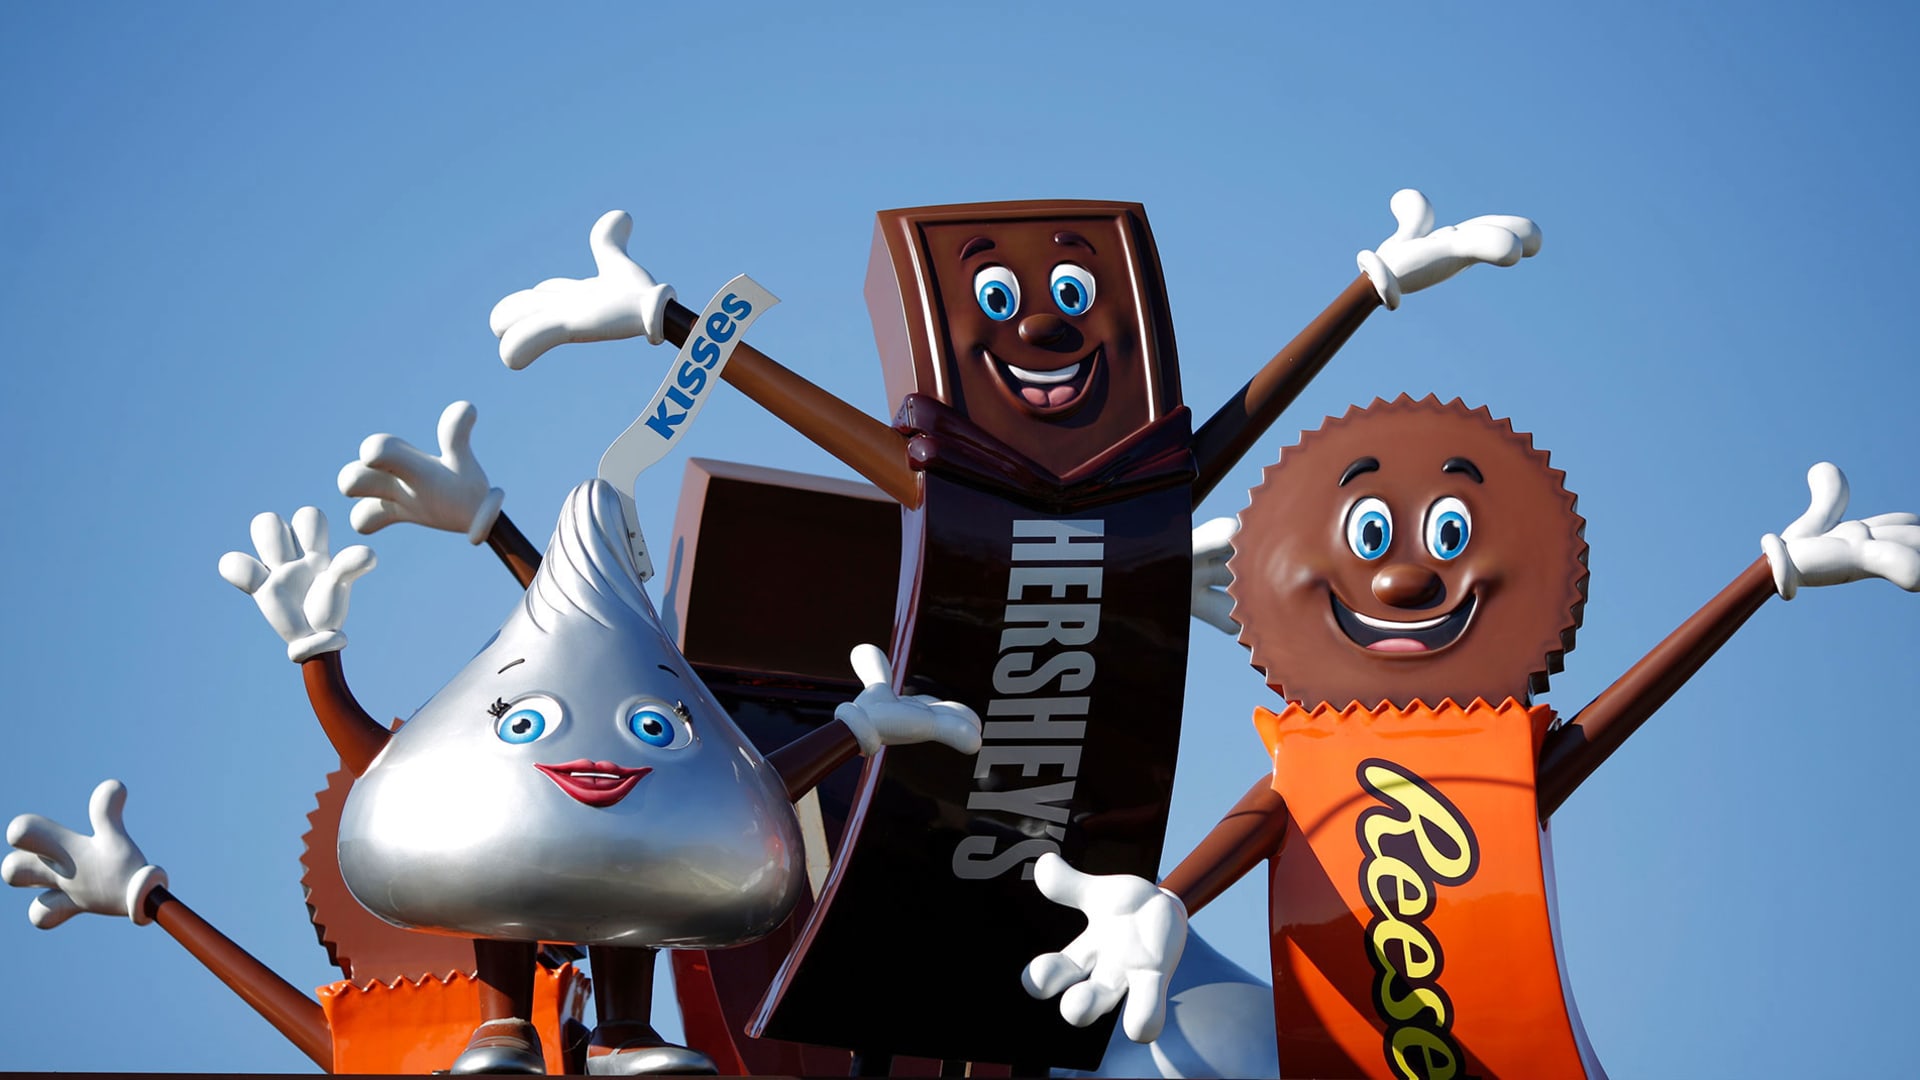 Not just a chocolate company: Hershey plots its future in snacking